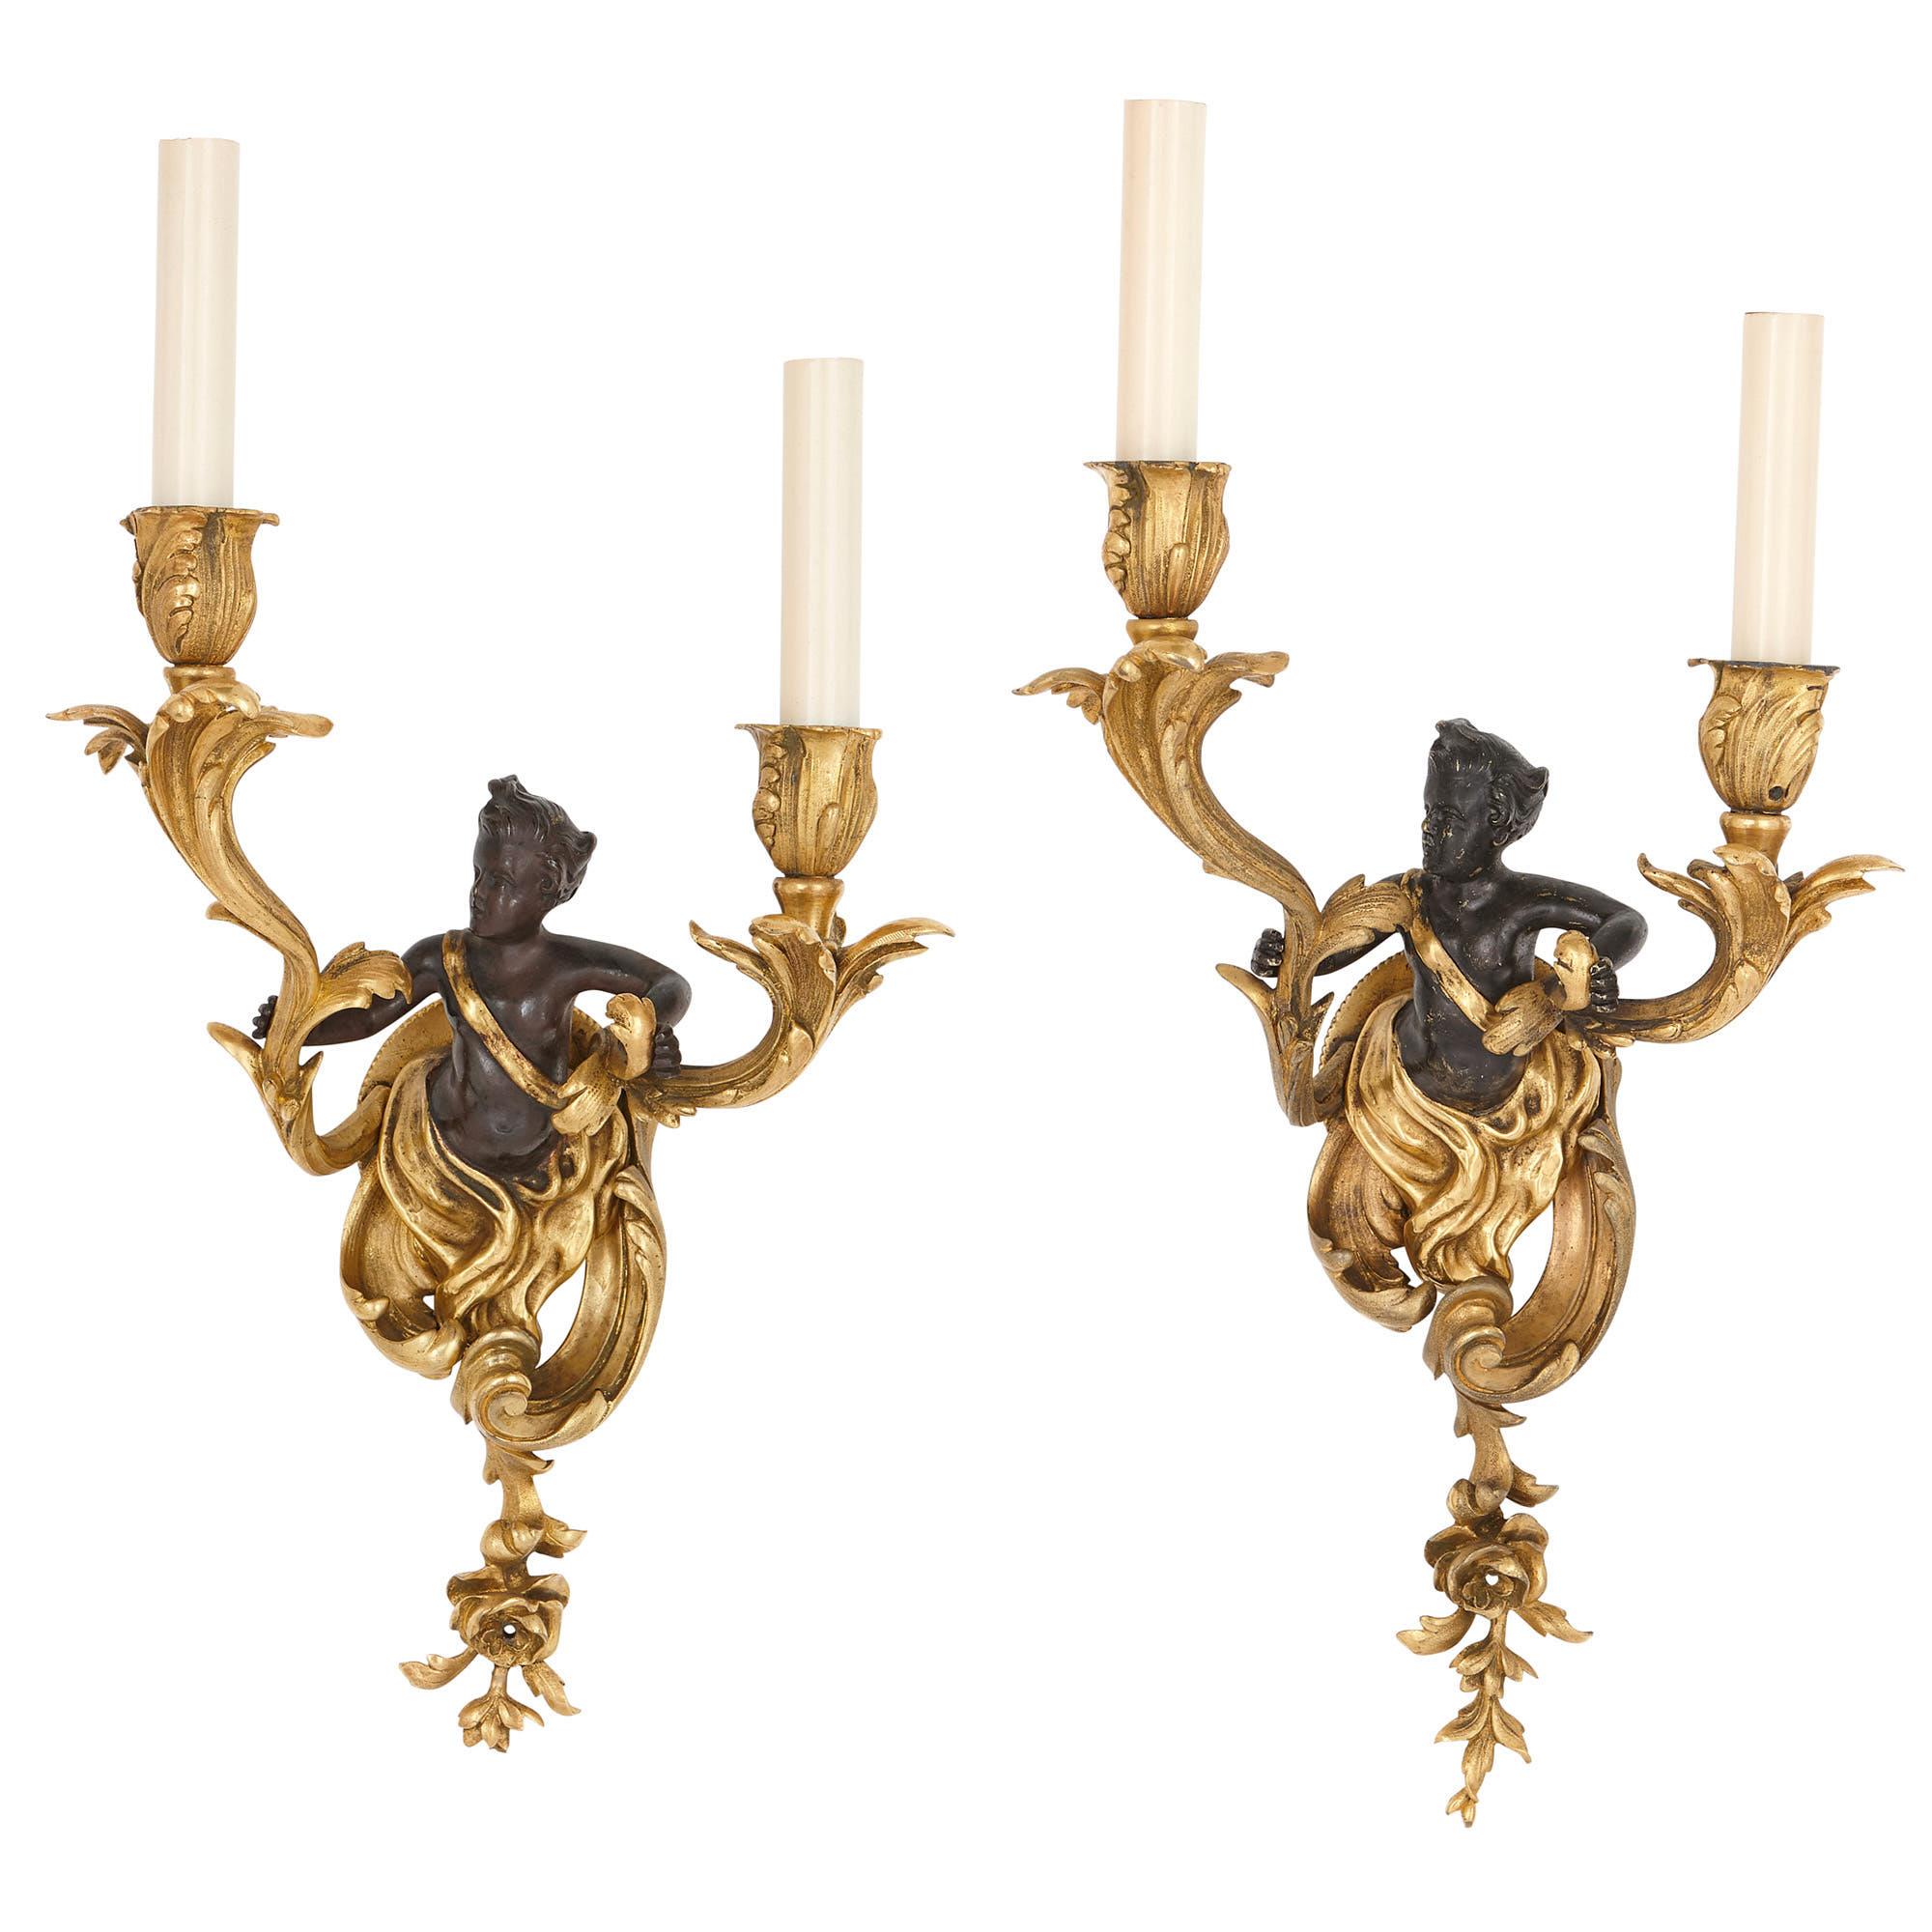 These sconces (wall lights) are wonderful examples of the 18th century Louis XV style, which was fashionably revived in the 19th century. The style was characterised by its rocaille motifs, including C- and S-scrolls, curling acanthus leaves, flower